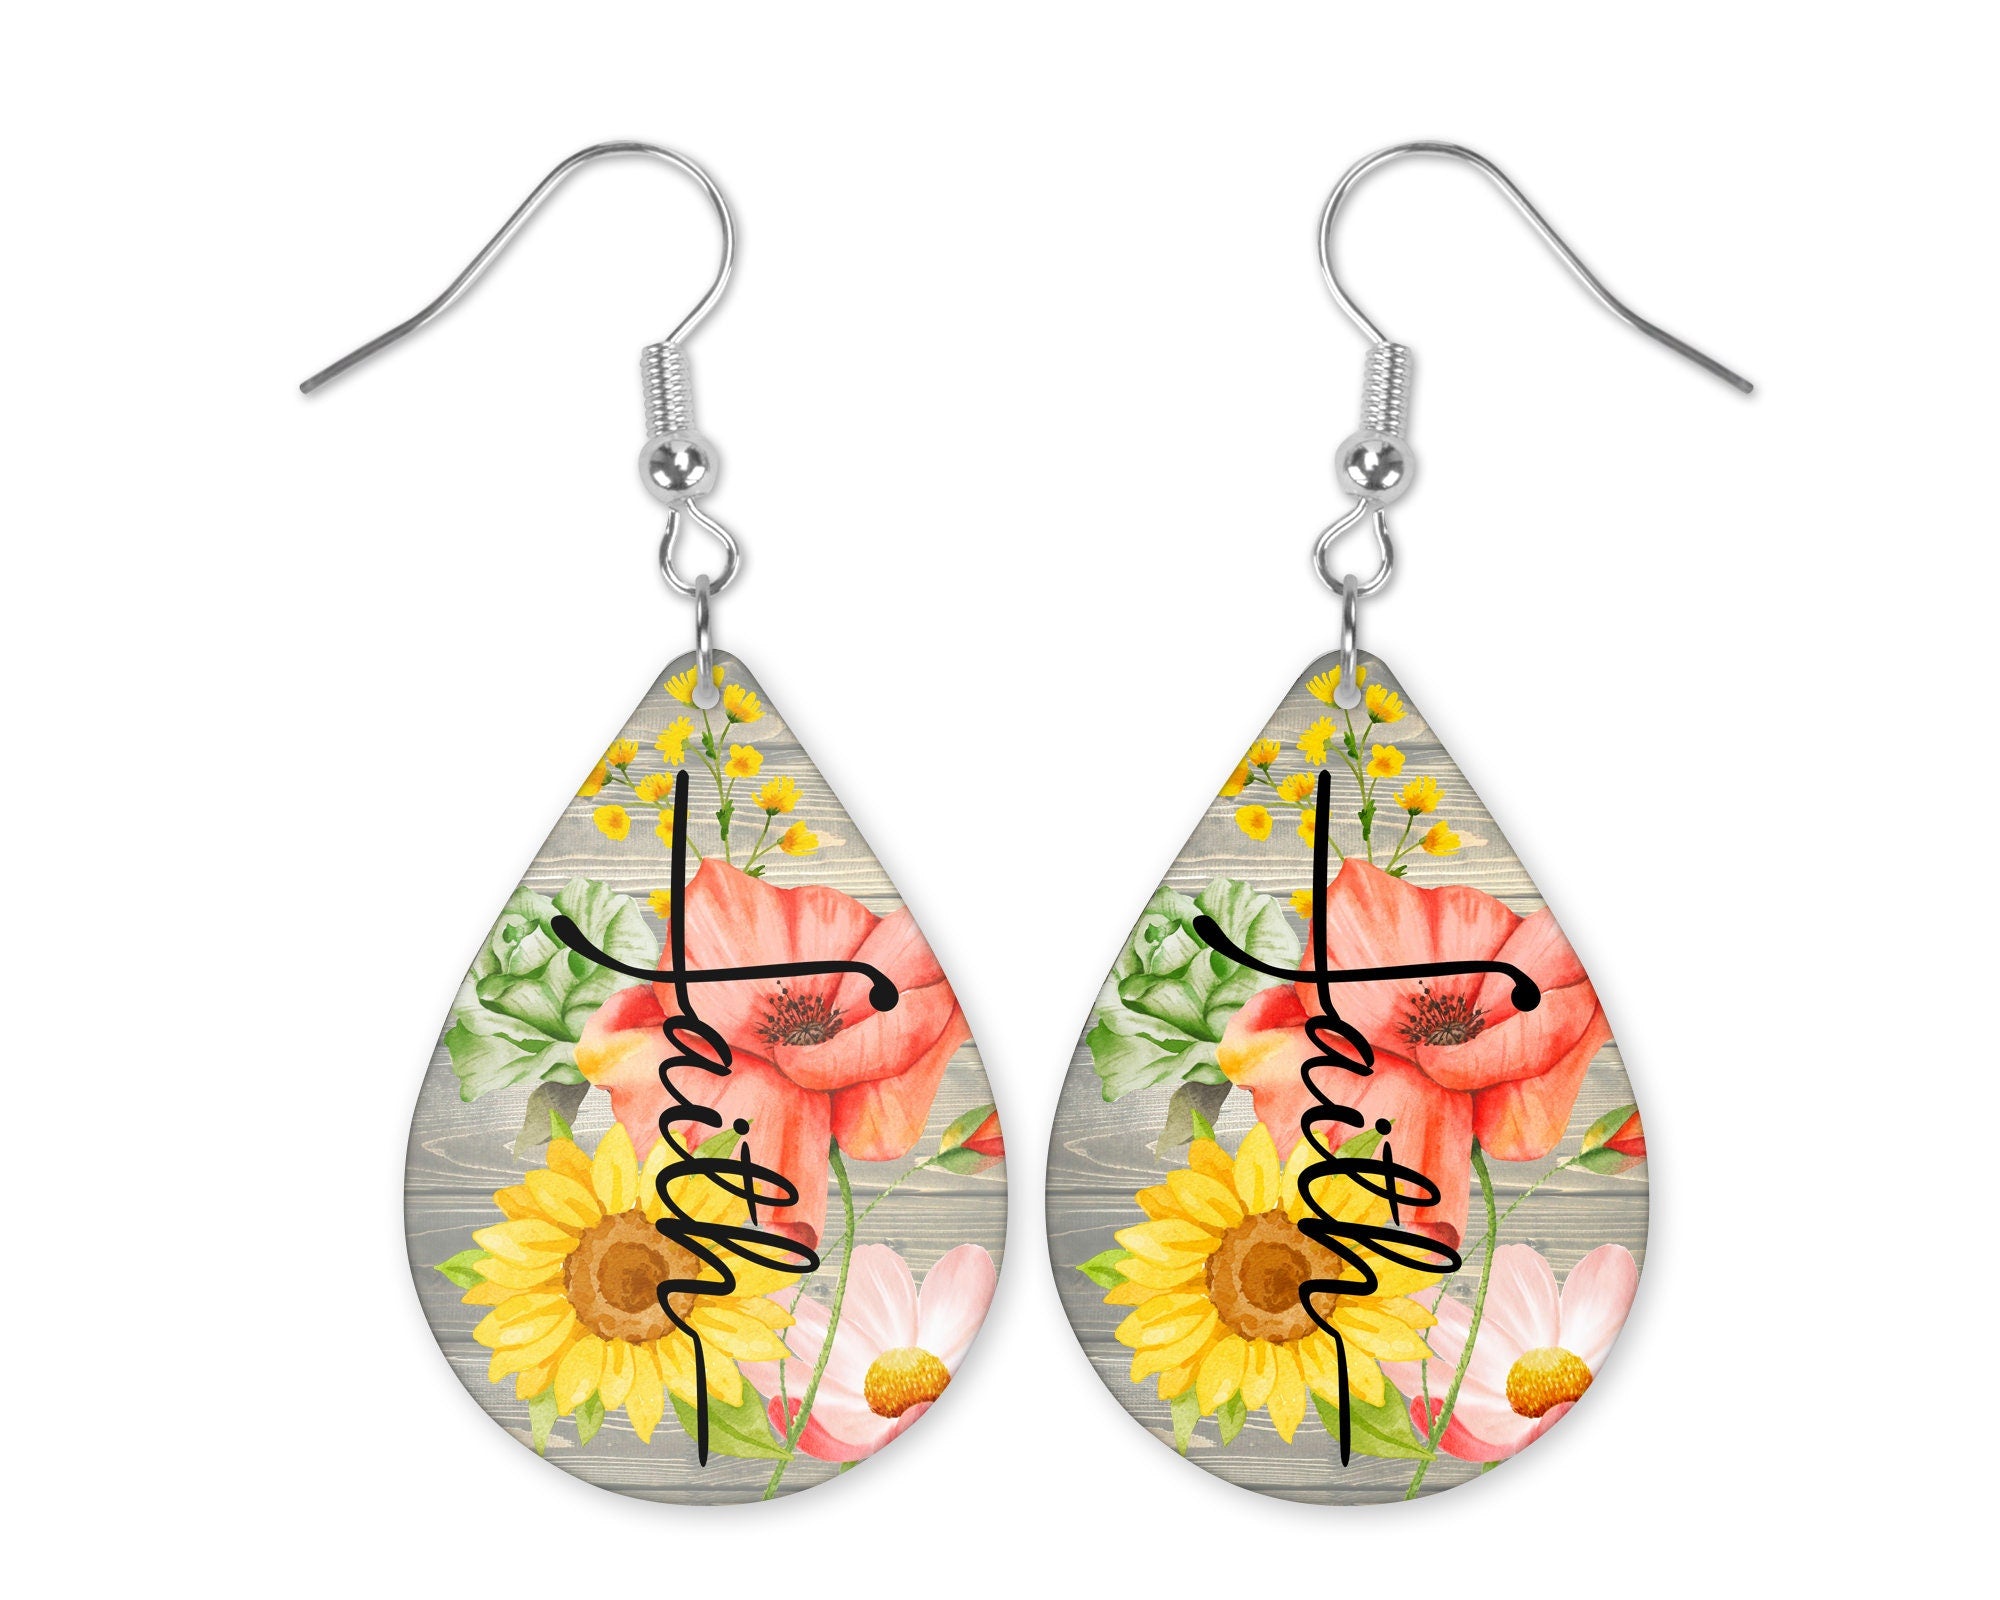 Sublimation Earrings: Blanks That Work and Some That DO NOT! 